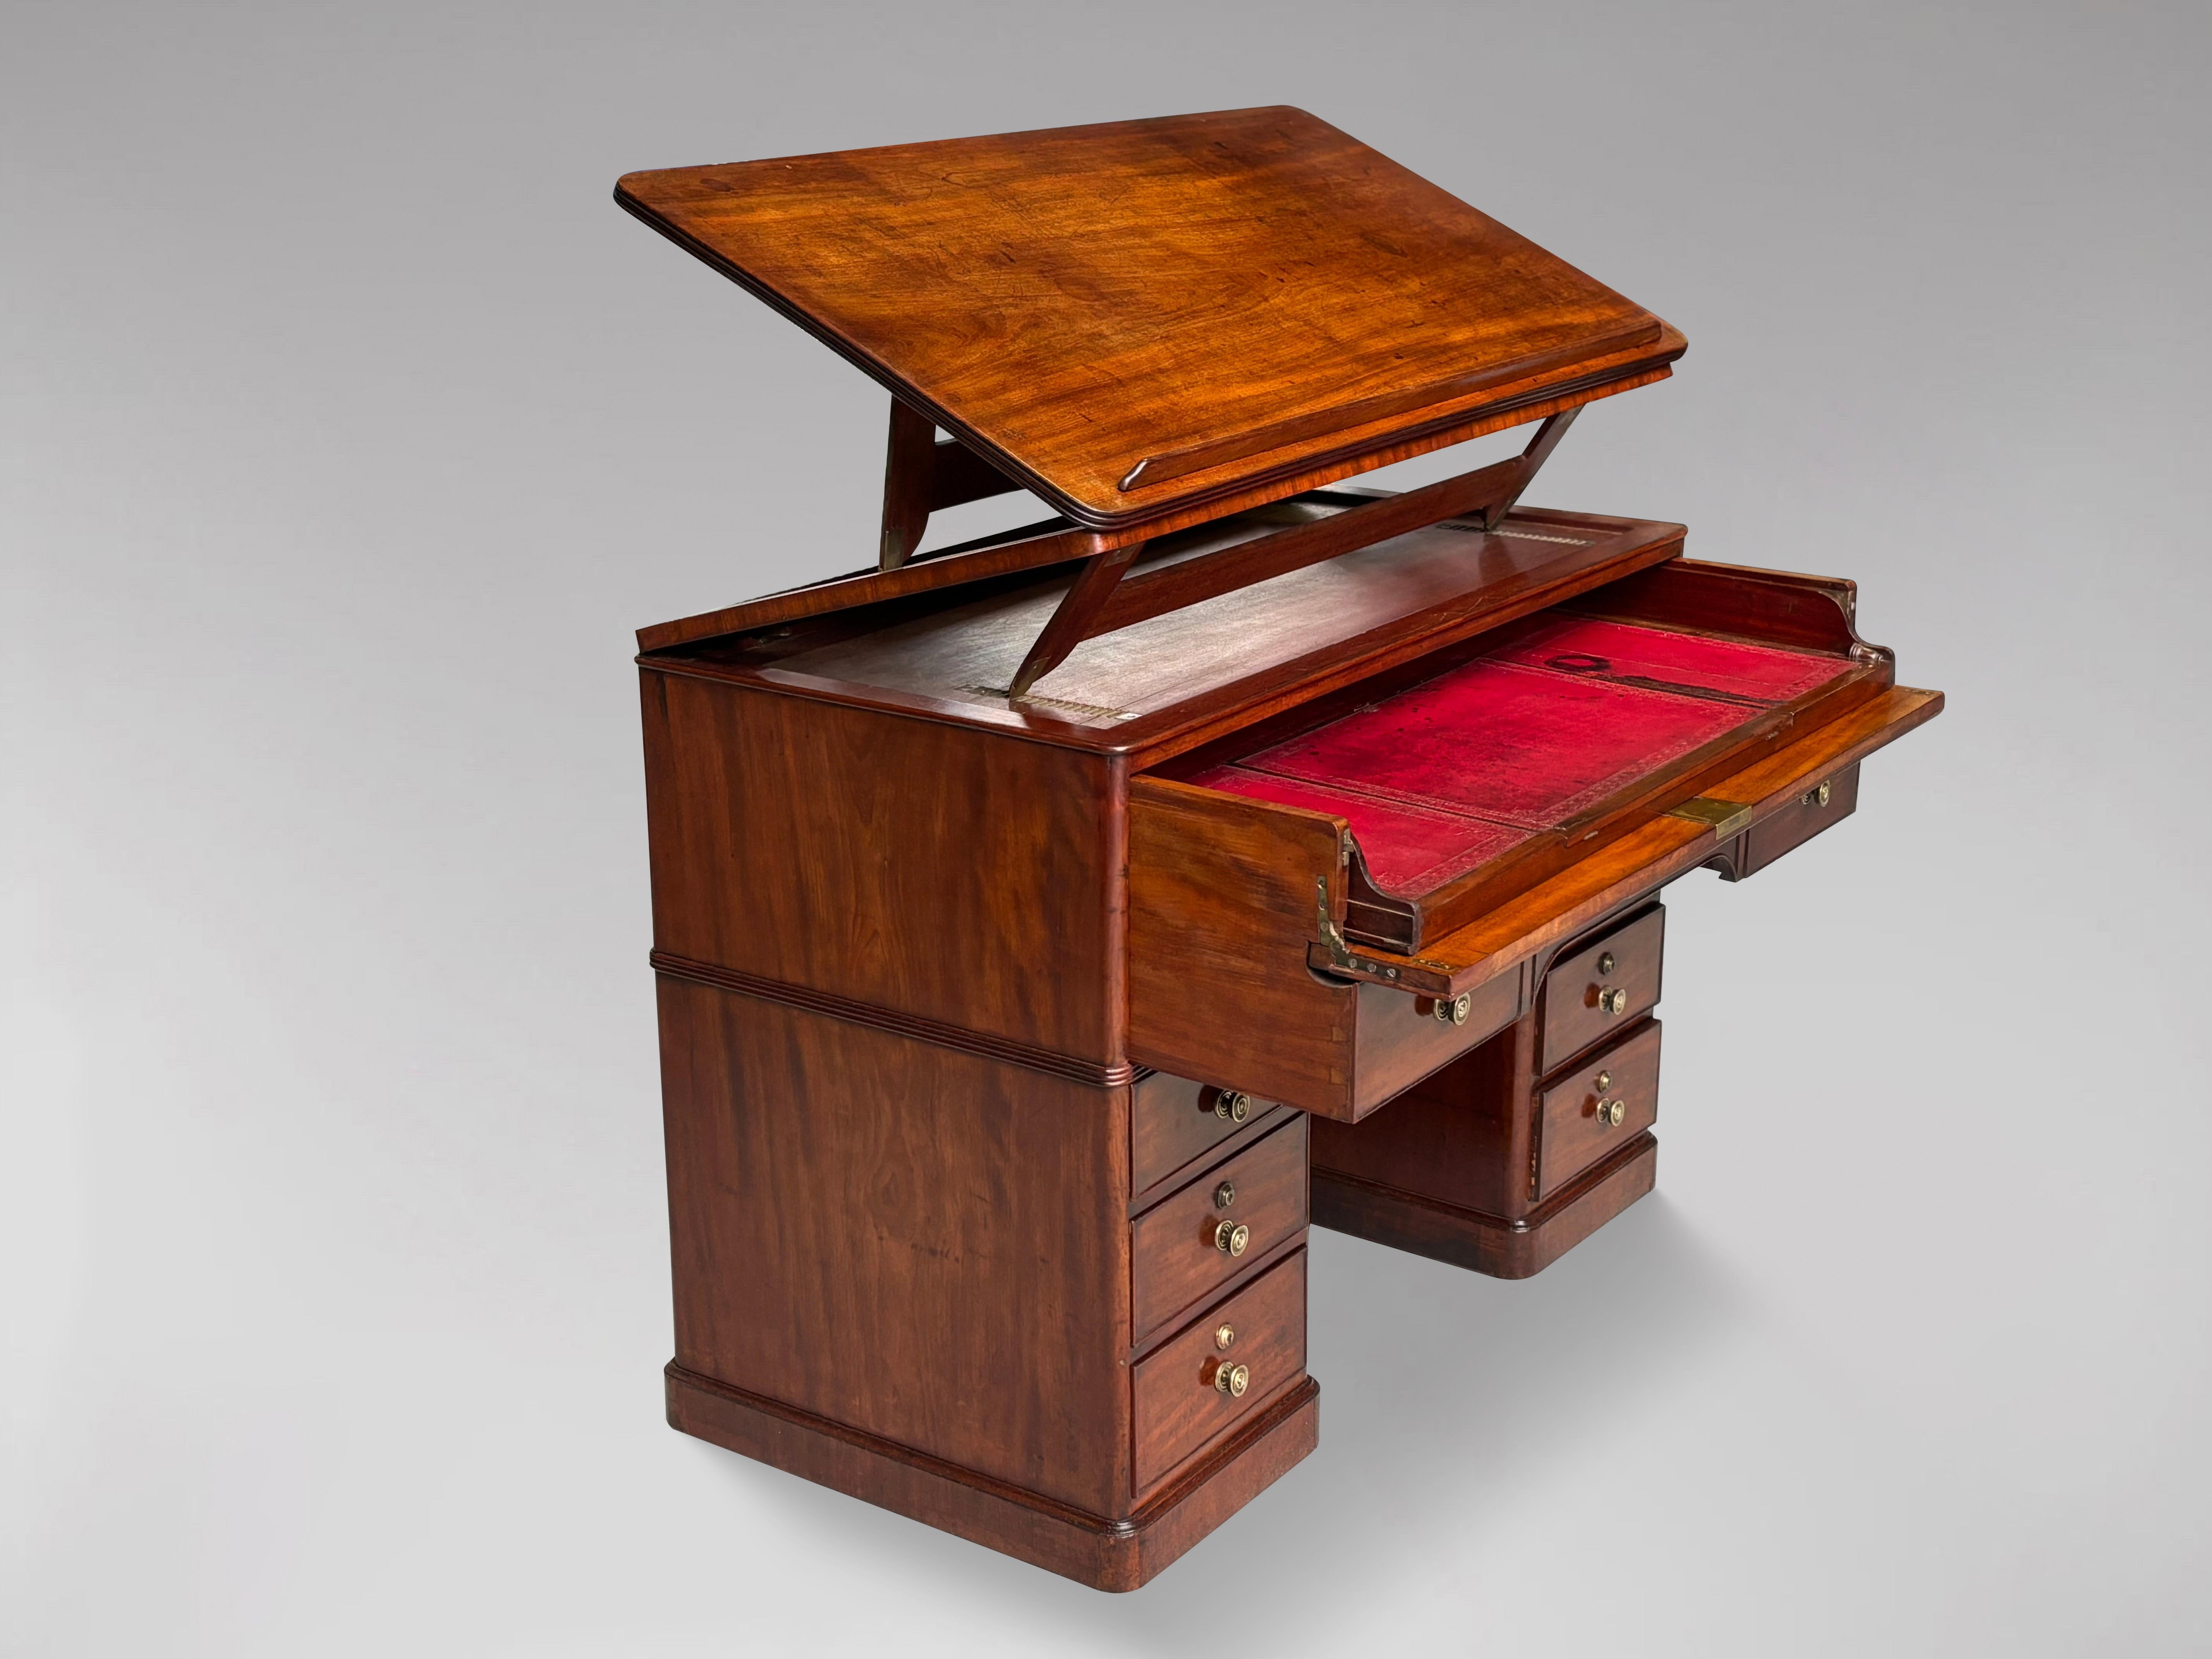 A stunning late 18th century, George III period solid mahogany architect's desk. Finished in the round, the top slants up for reading, or cantilevers up for either reading or writing while standing up. The top drawer opens to reveal a leather topped